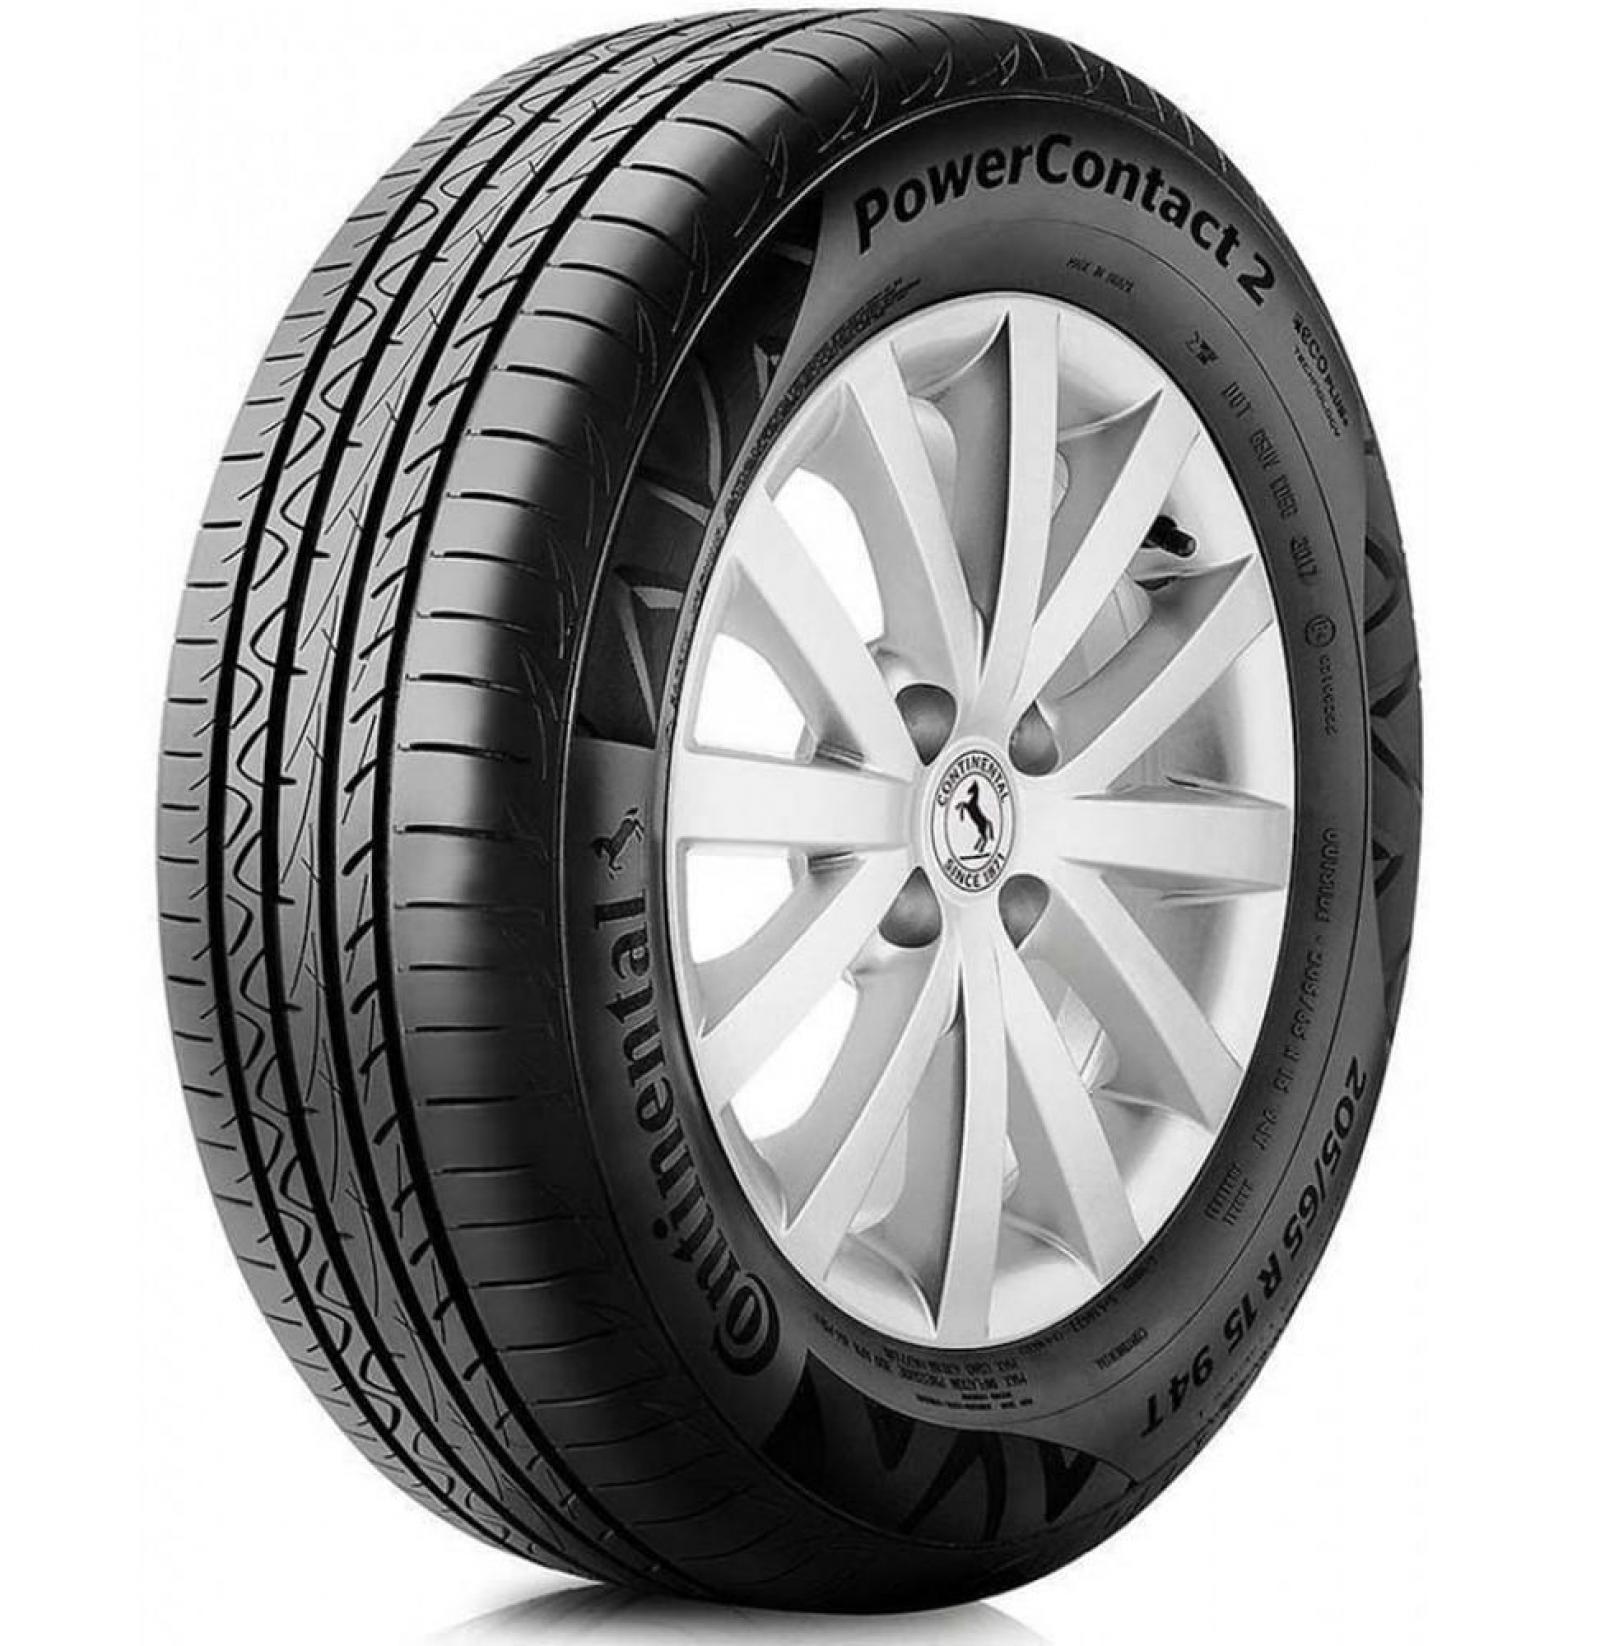 Power contact 2 205/70R16